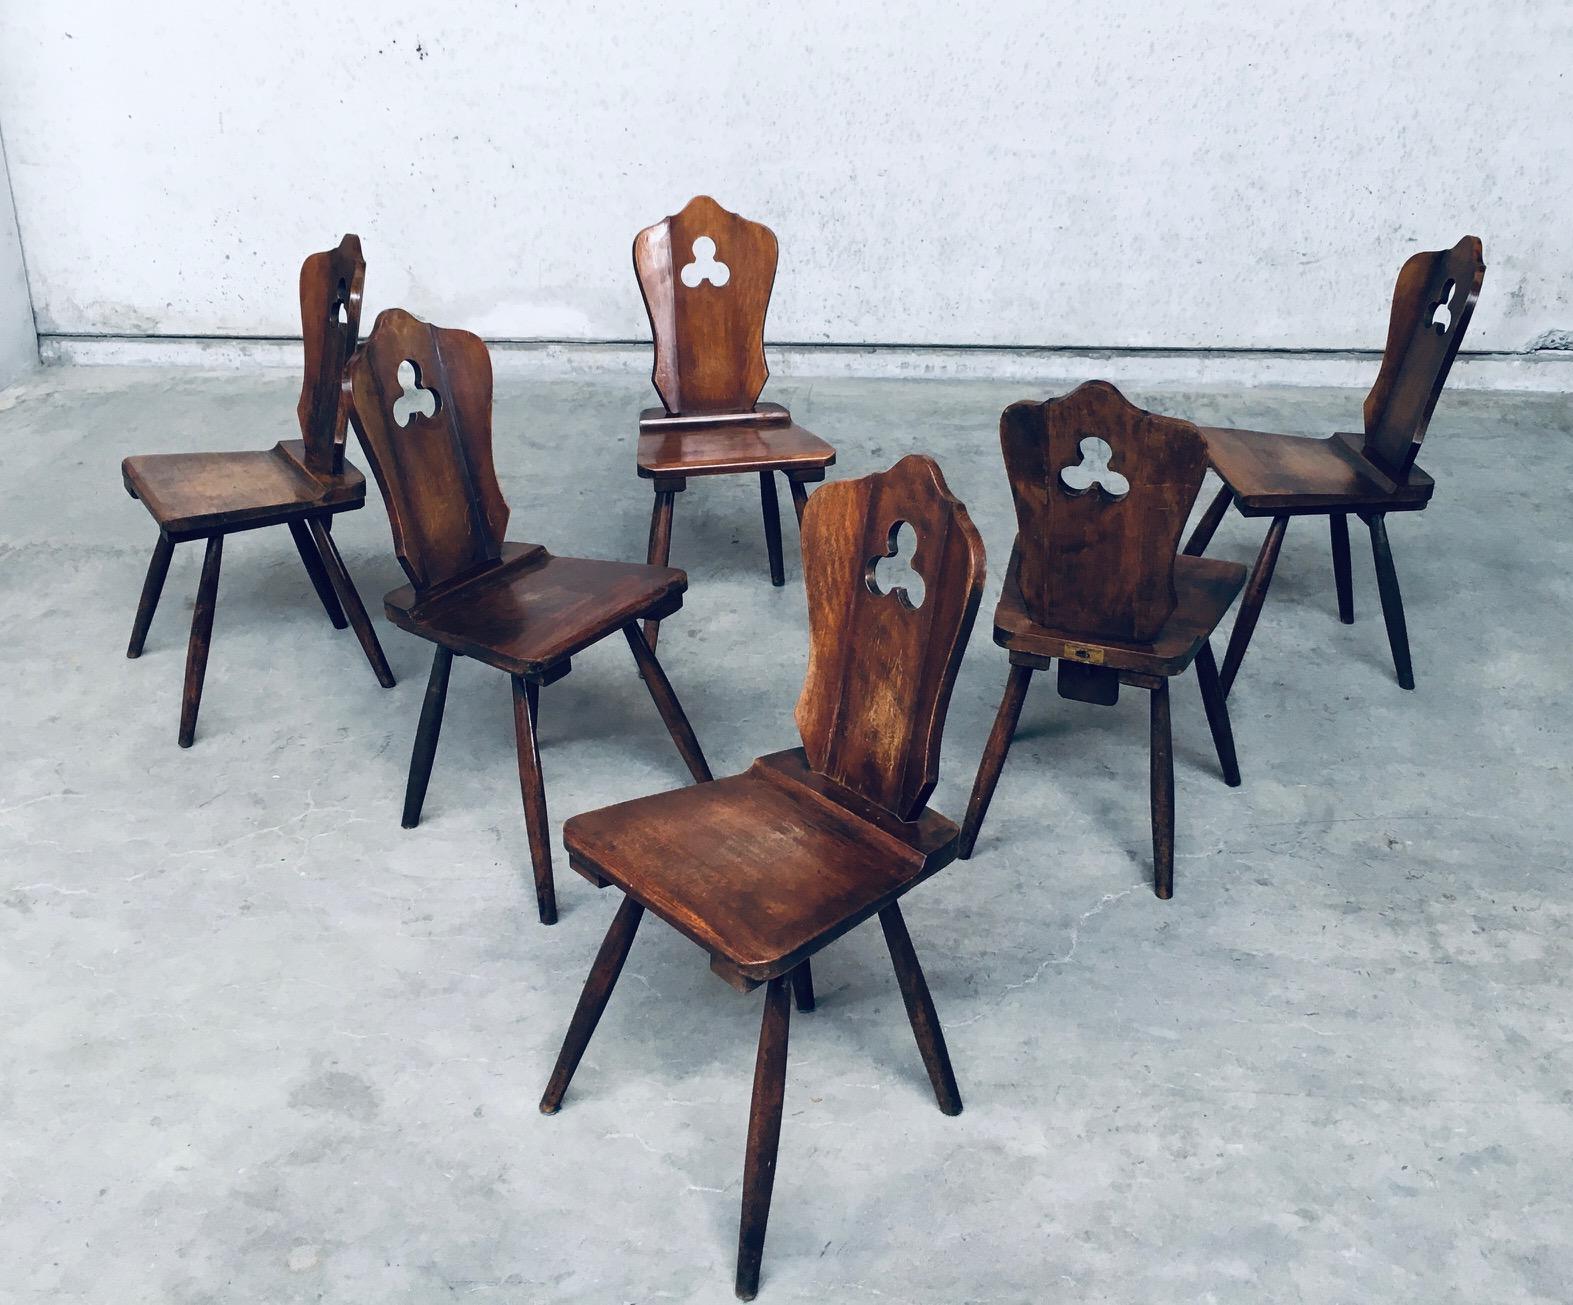 Rustic Brutalist Design Dining Chair Set by Lux-Wood, Belgium, 1960's For Sale